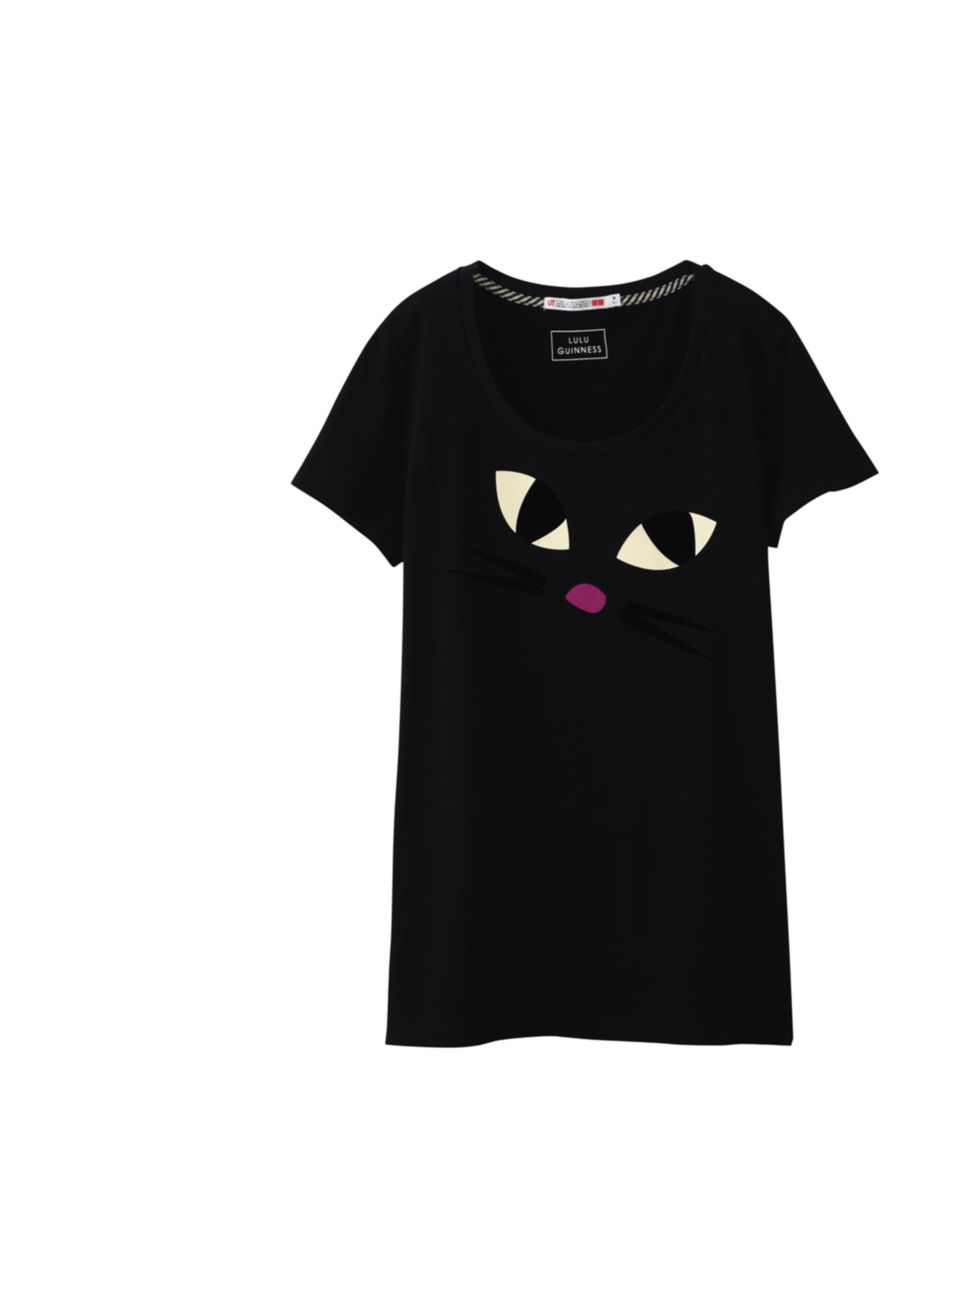 <p>Cute and feminine just like her iconic accessories, this cat print tee is just one of the 14 Lulu Guinness T-shirts now available at Uniqlo Lulu Guinness printed T-shirt, 314.90, at <a href="http://www.uniqlo.com/uk/">Uniqlo</a></p>